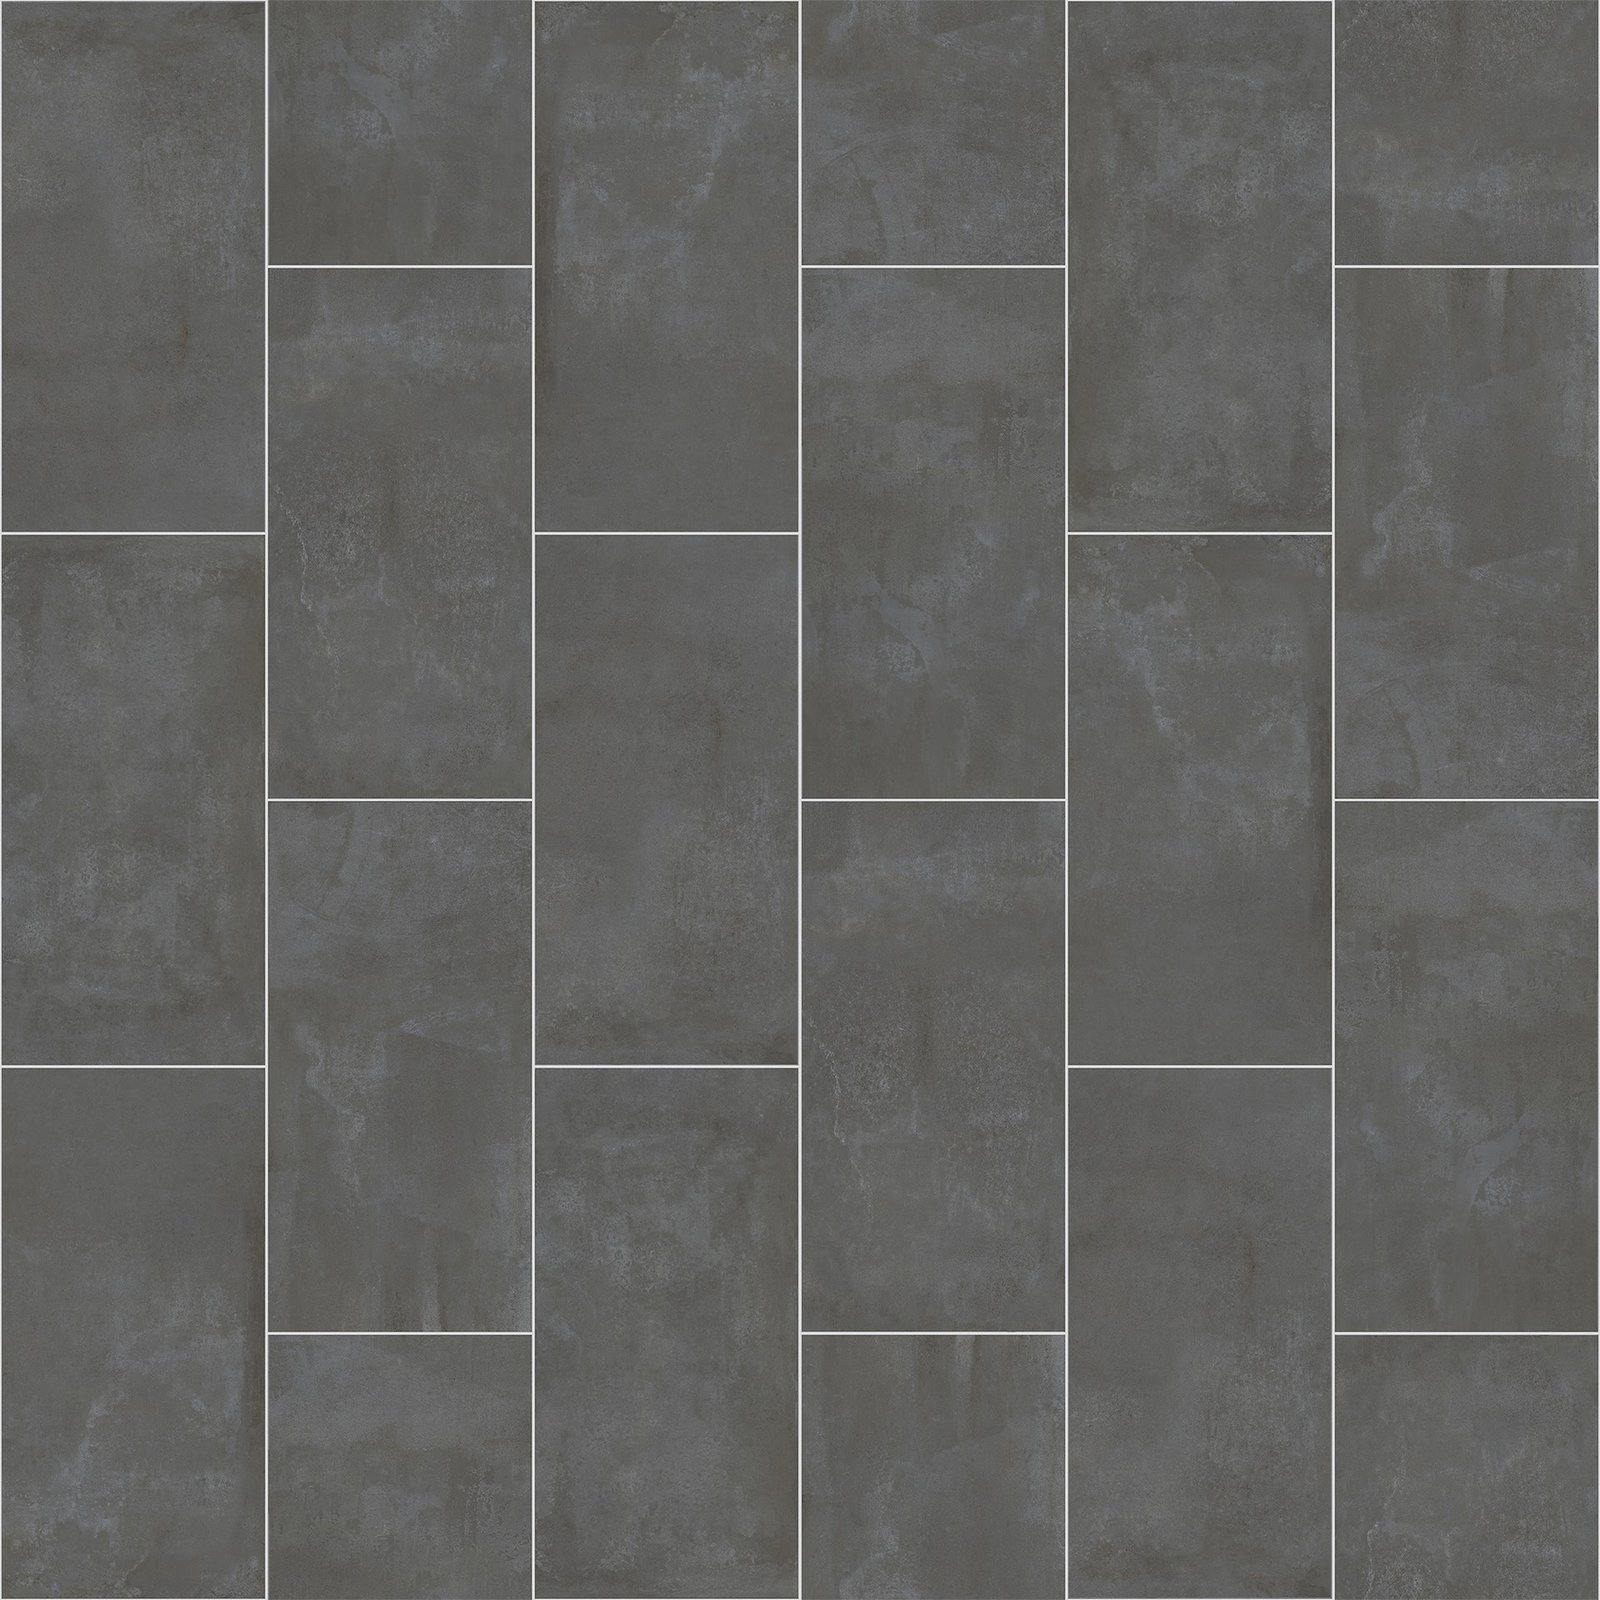  White grout with grey tiles can look eye catching